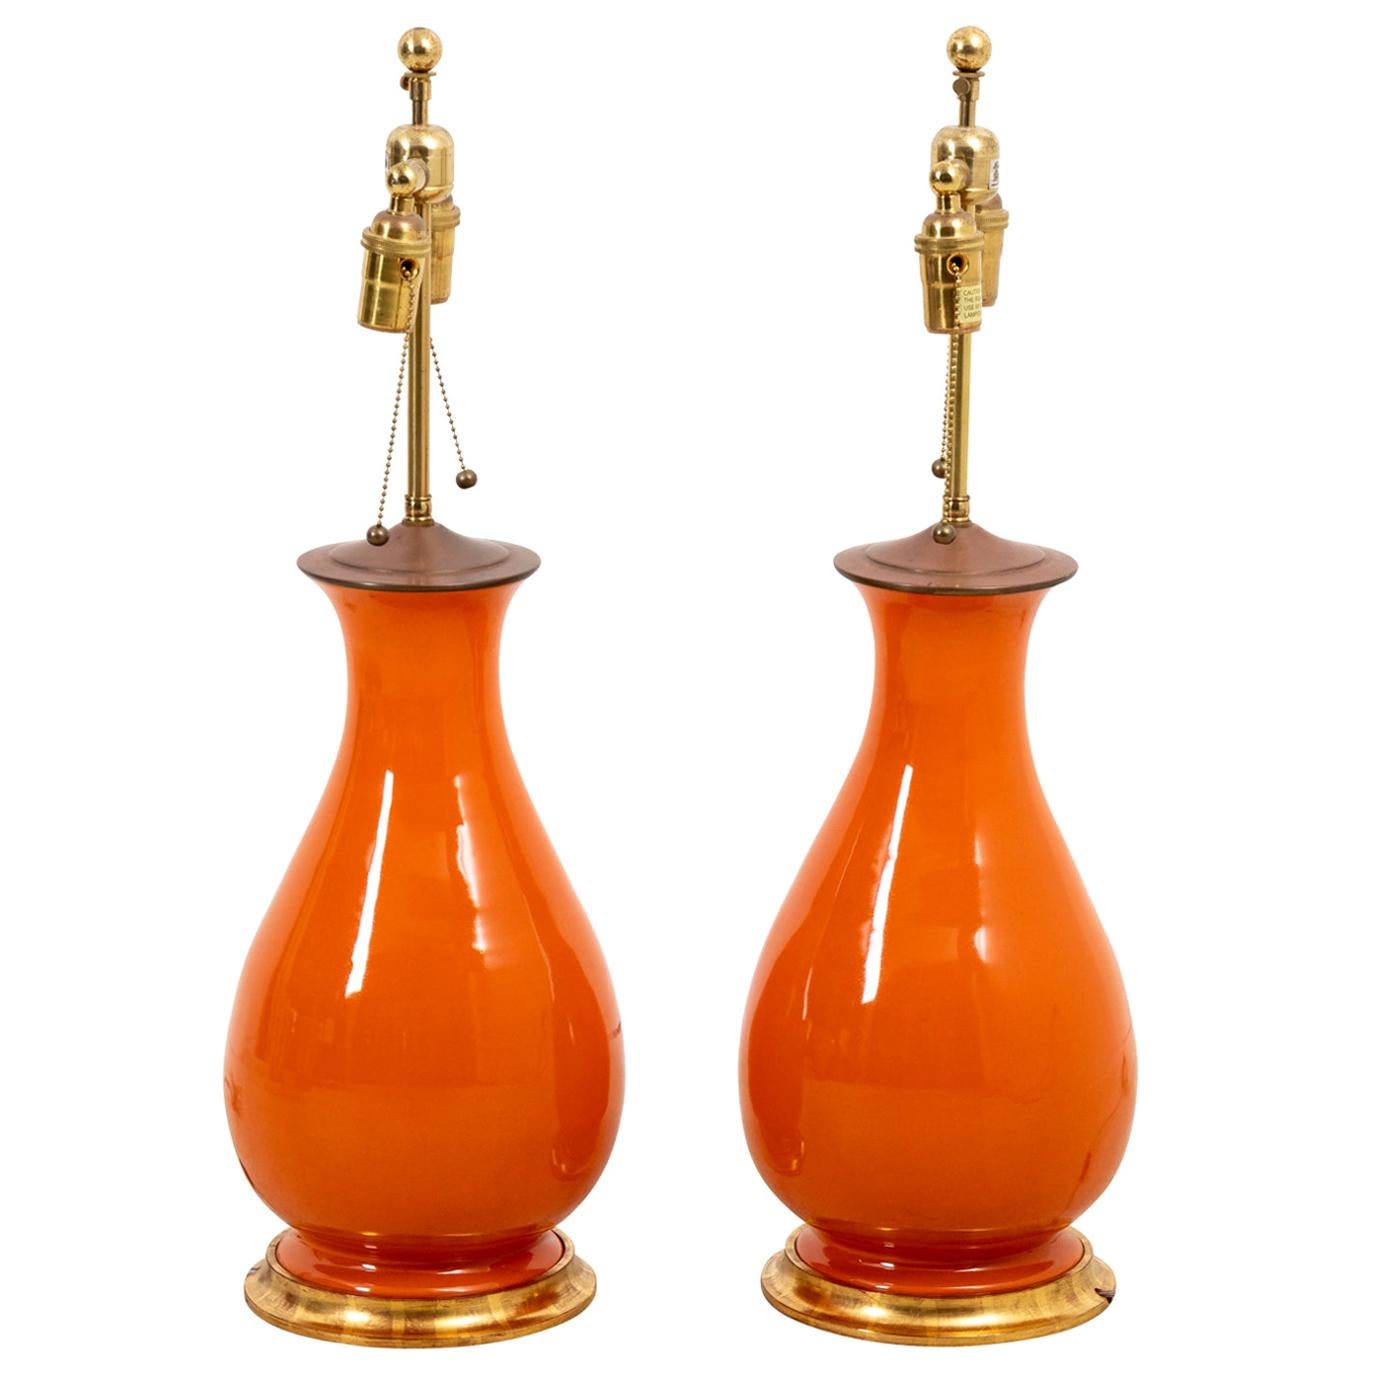 Pair of Christopher Spitzmiller vintage large Hana orange lamps on gold gilded bases with brass double sockets, circa 2012. Signed with turquoise lable-c.2012. Made in the United States. Please note of wear consistent with age including minor patina